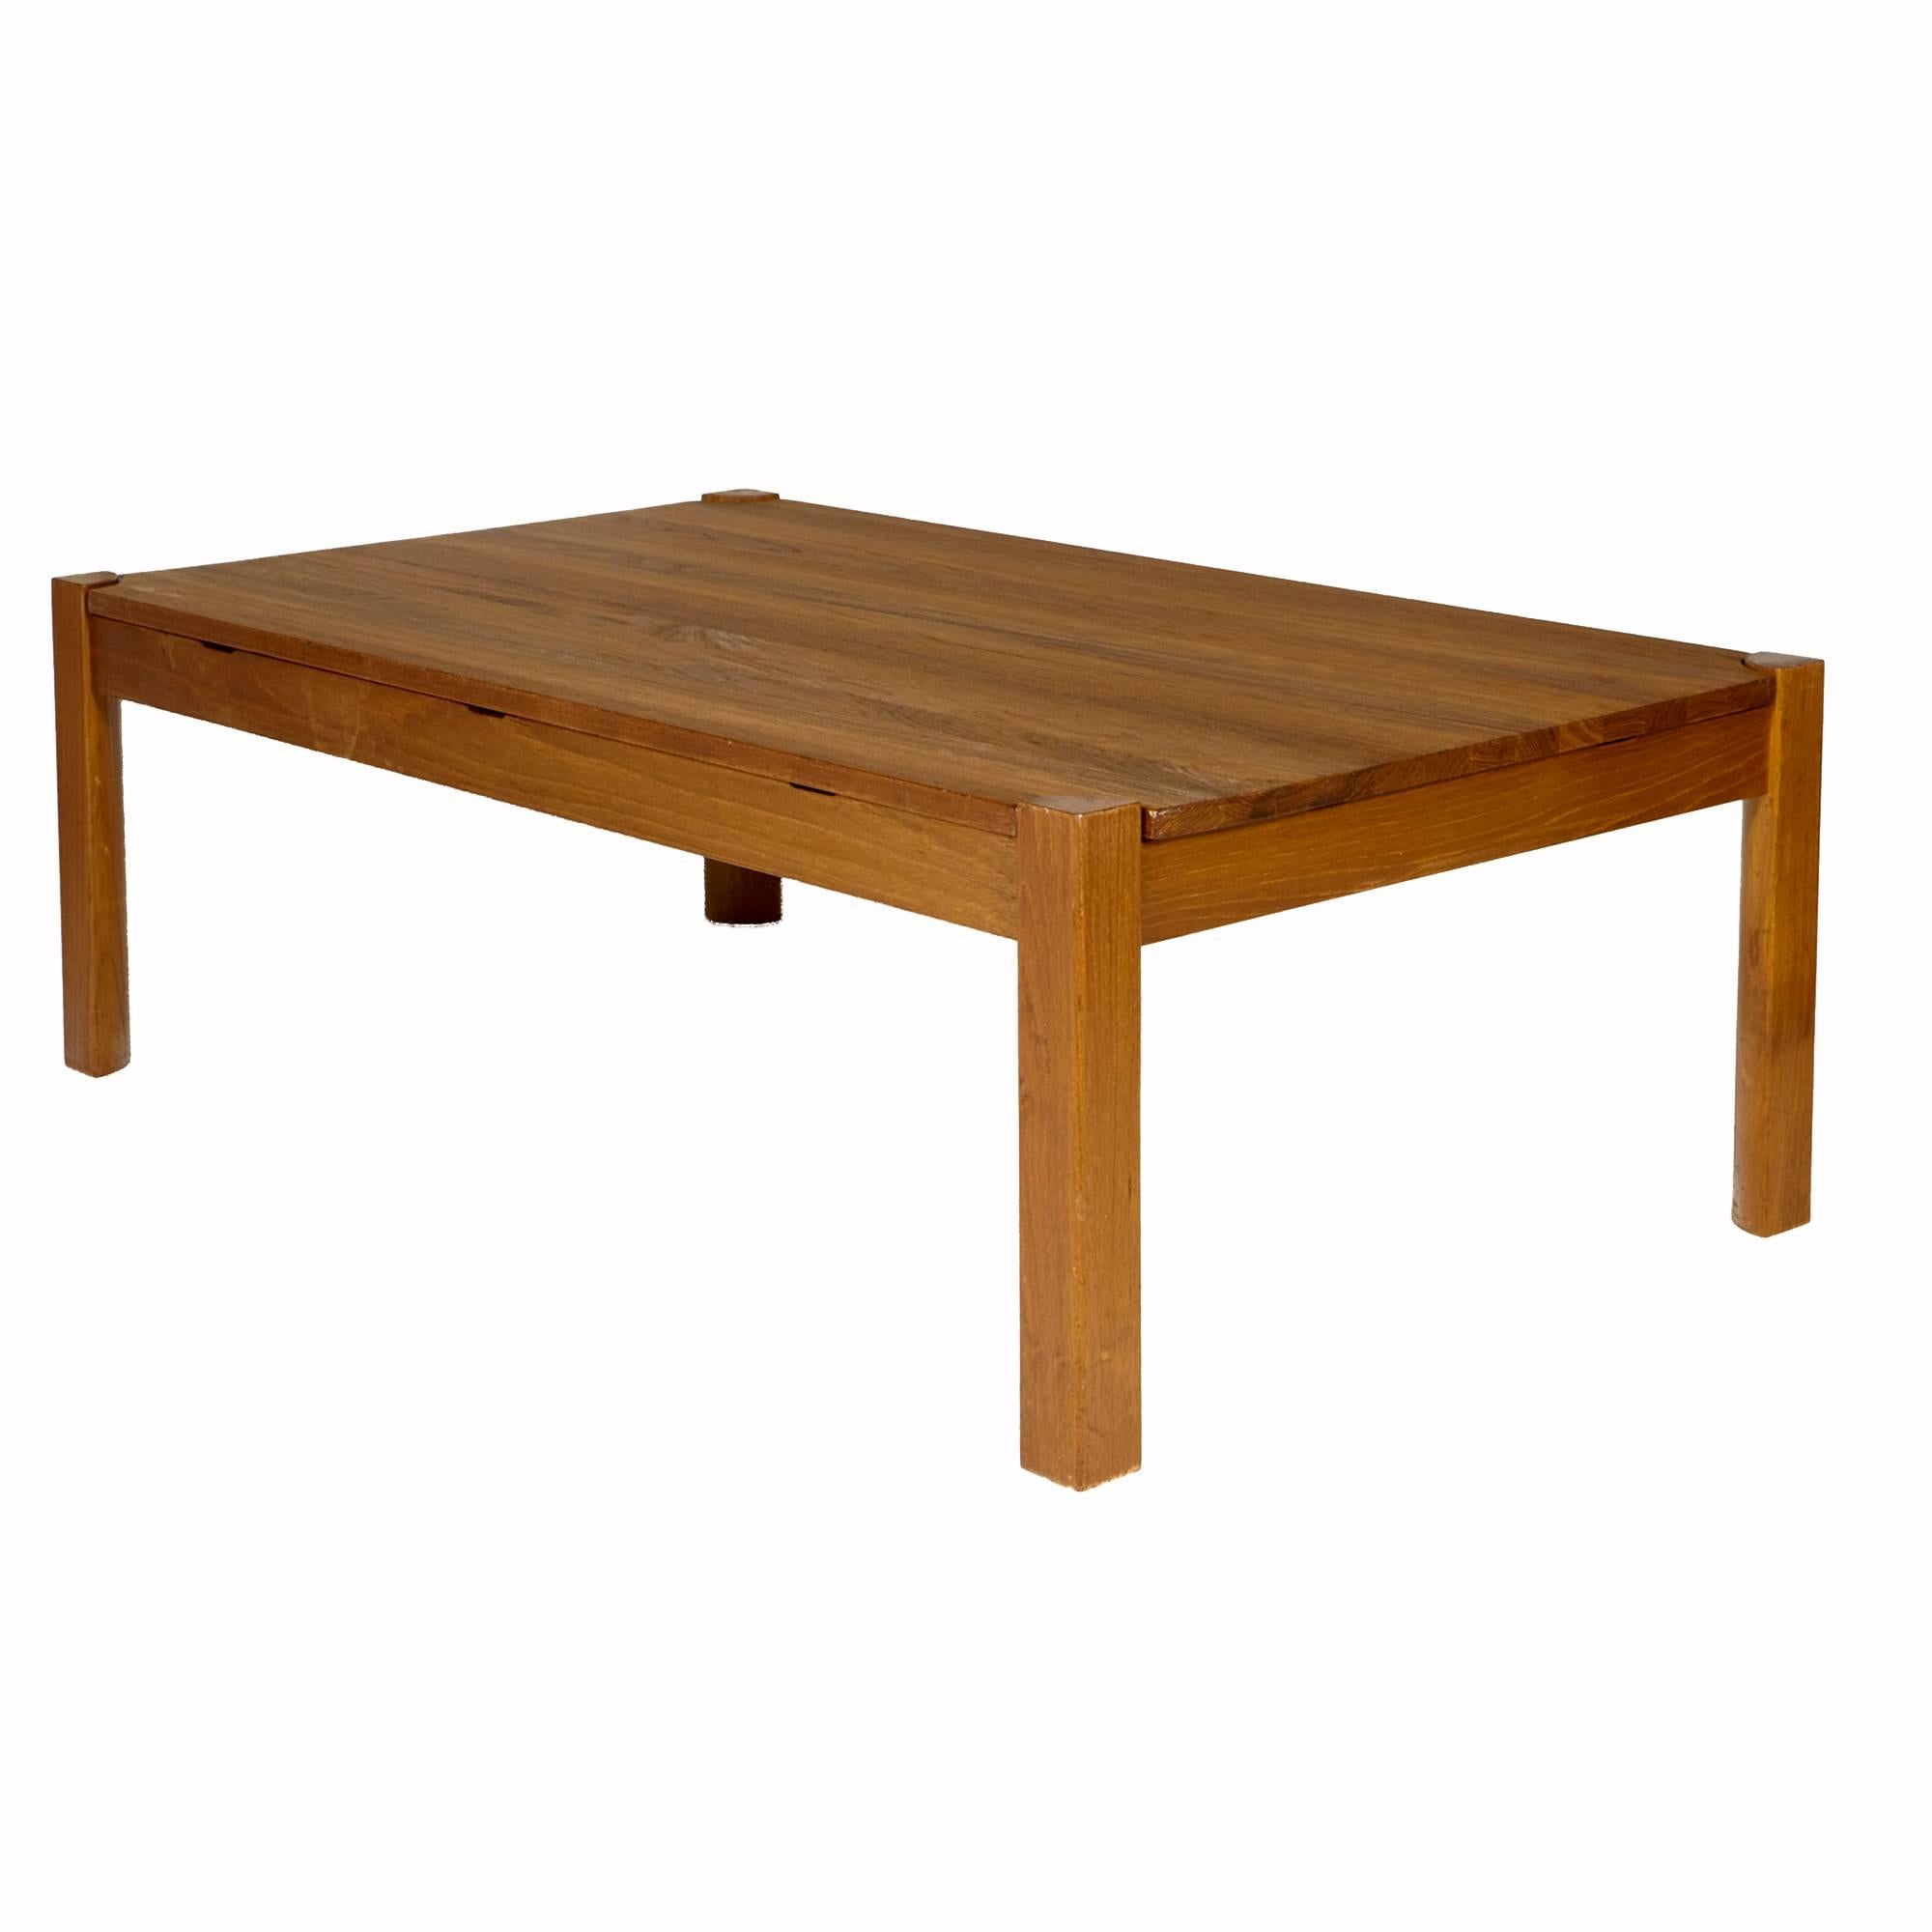 Vintage 1960s solid teak Danish coffee table with a reversible top. The table is in refinished condition. Unmarked.